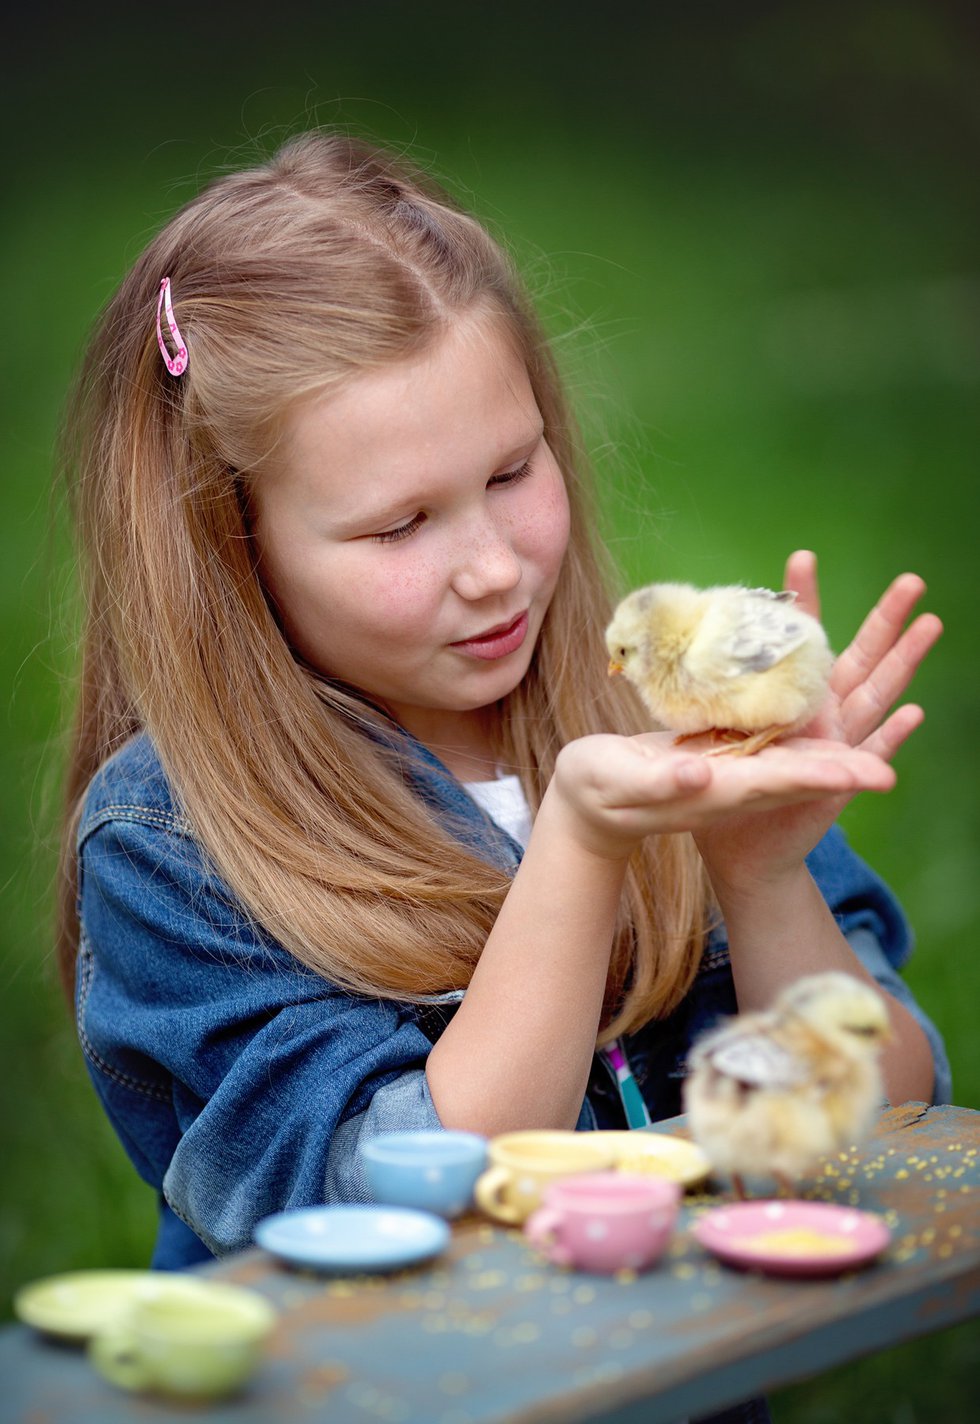 imagesevents27421girl-with-chick-jpg.jpe